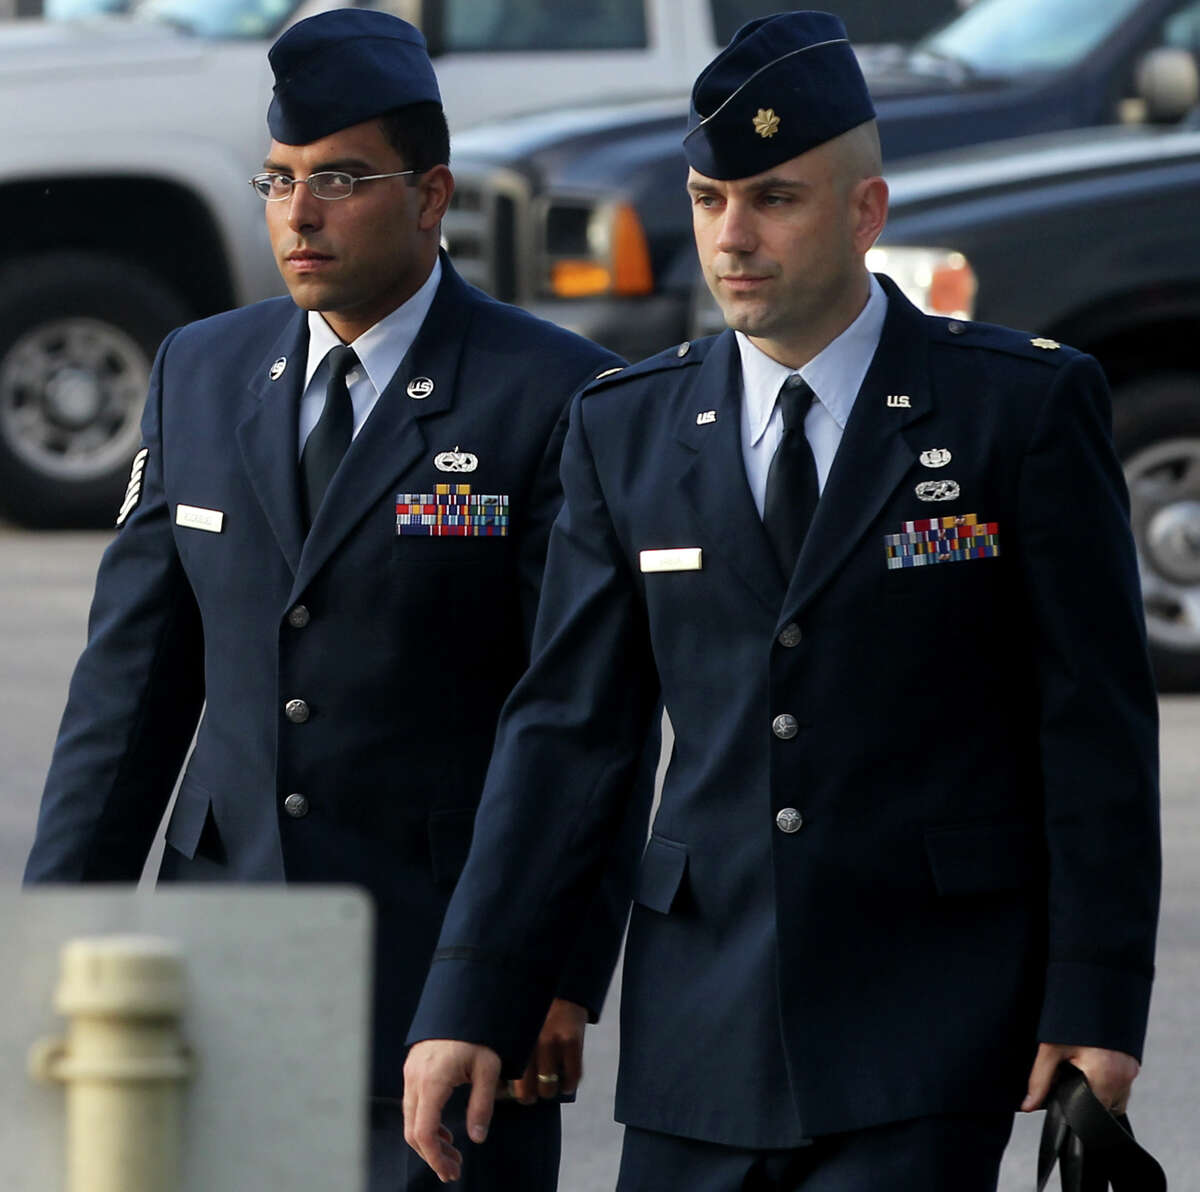 Air Force Tech Sergeant Jaime Rodriguez (left) heads for court Thursday June 6, 2013 at Joint Base San Antonio-Lackland. He is accused of having illicit contact with 18 women, and having sex with four of them.